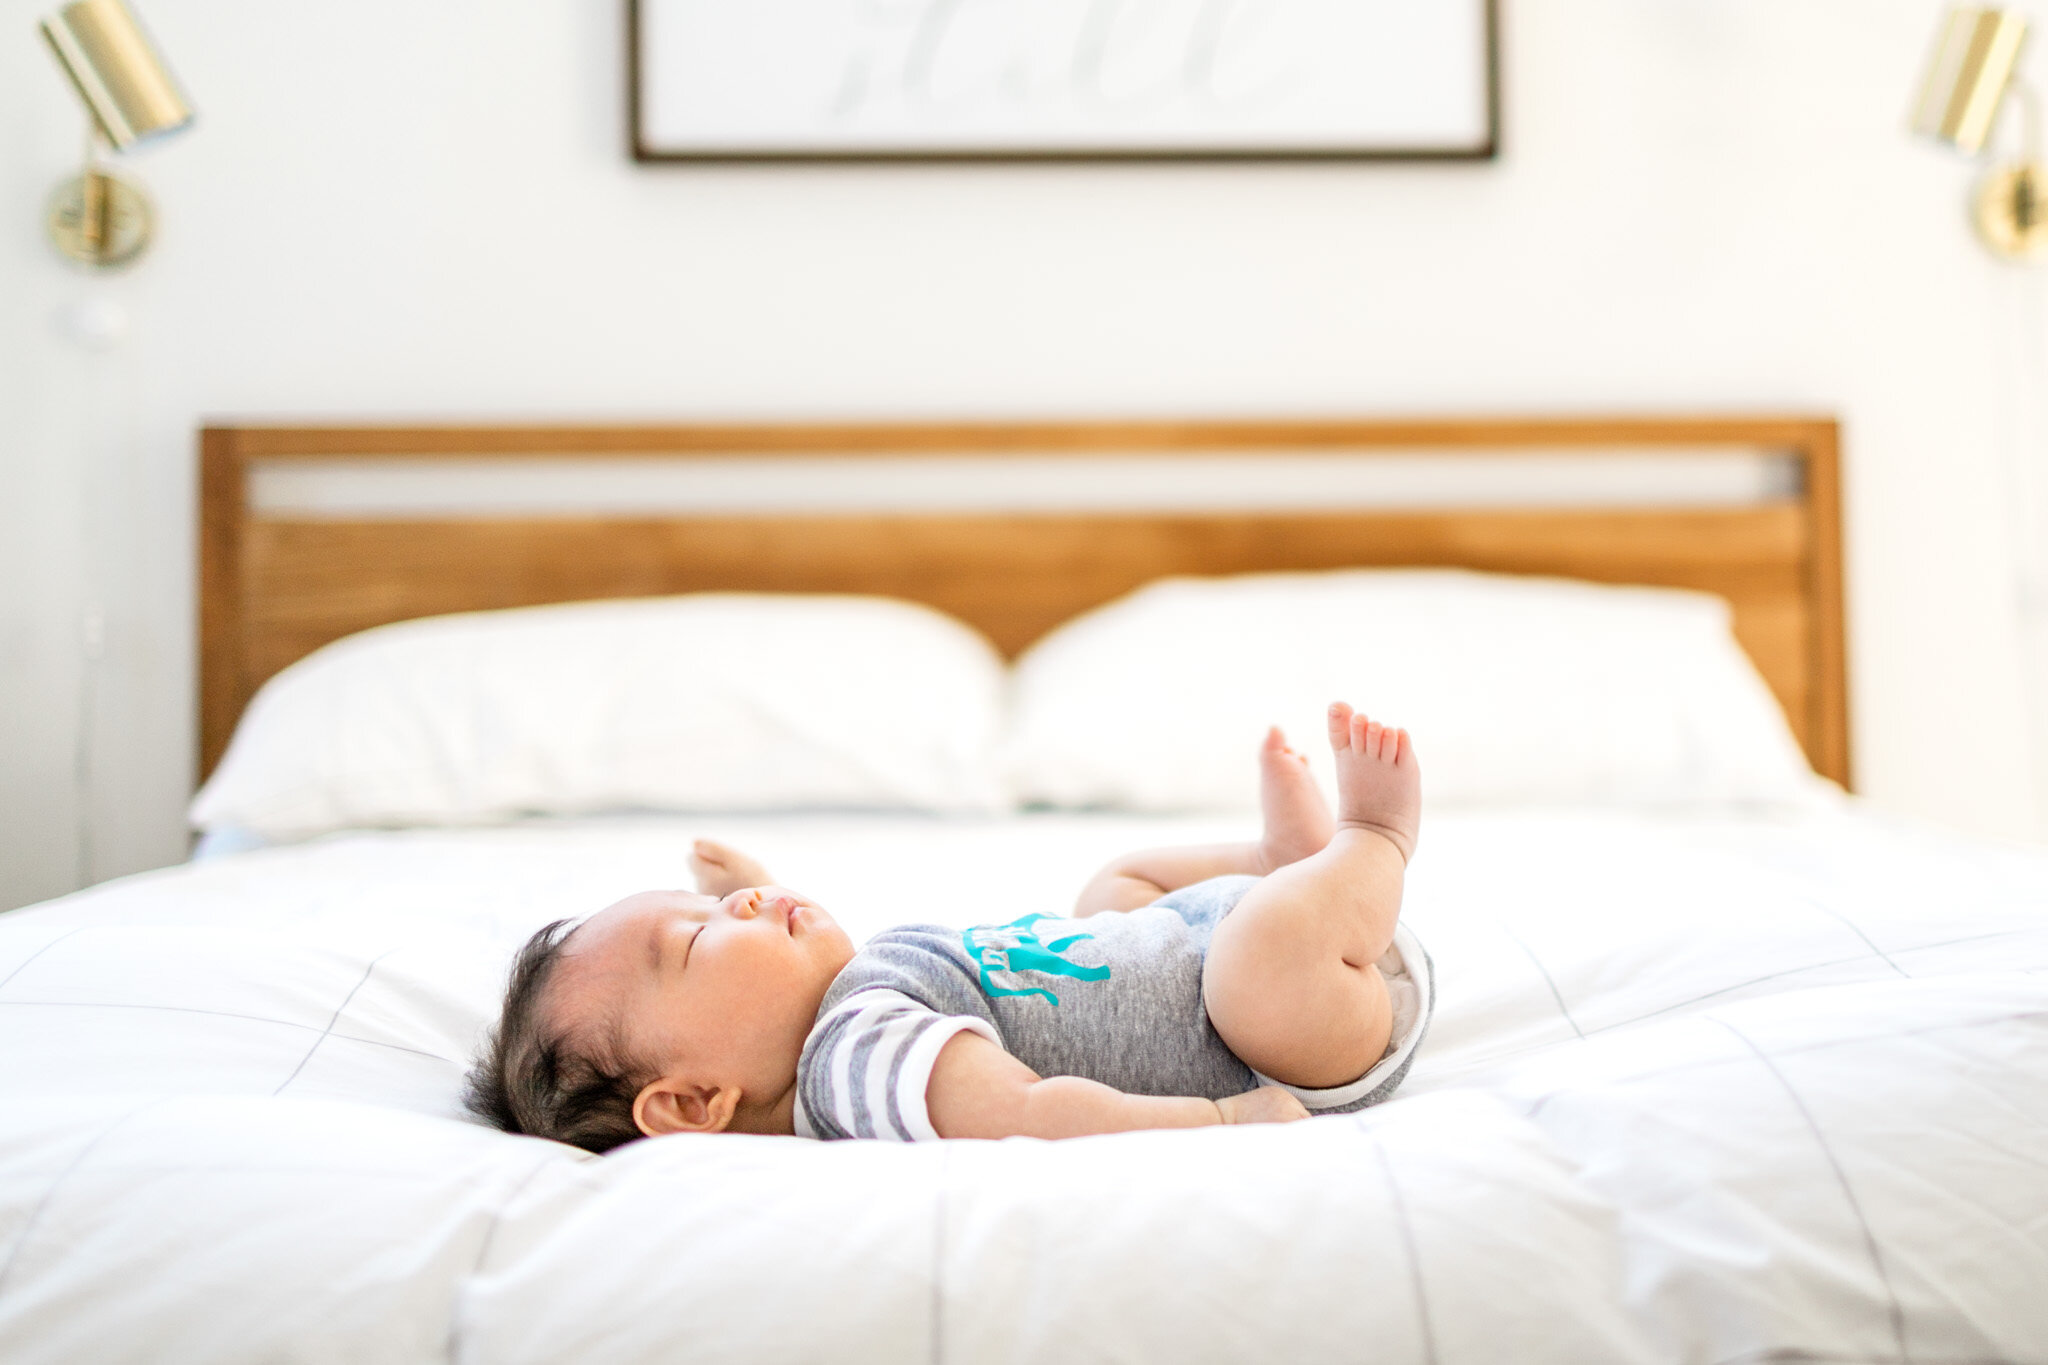 Raleigh Newborn Photographer | By G. Lin Photography | Baby sleeping peacefully in bedroom